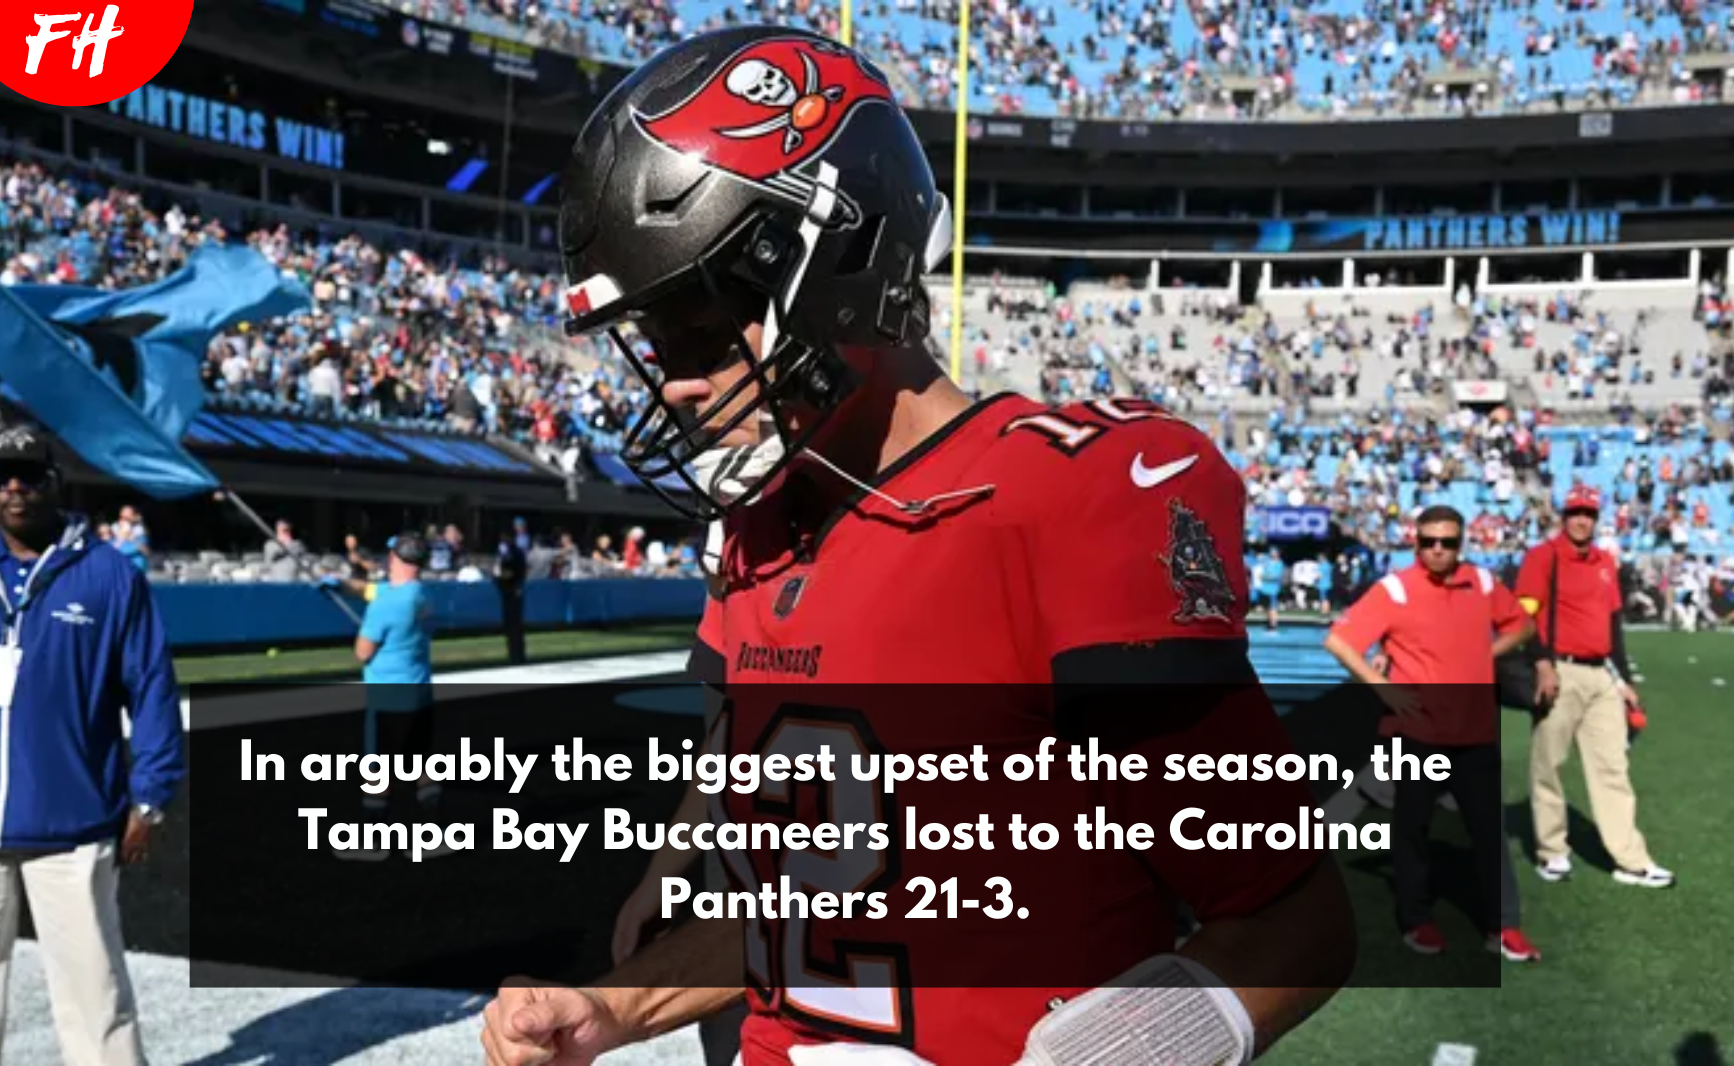 In arguably the biggest upset of the season, the Tampa Bay Buccaneers lost to the Carolina Panthers 21-3.